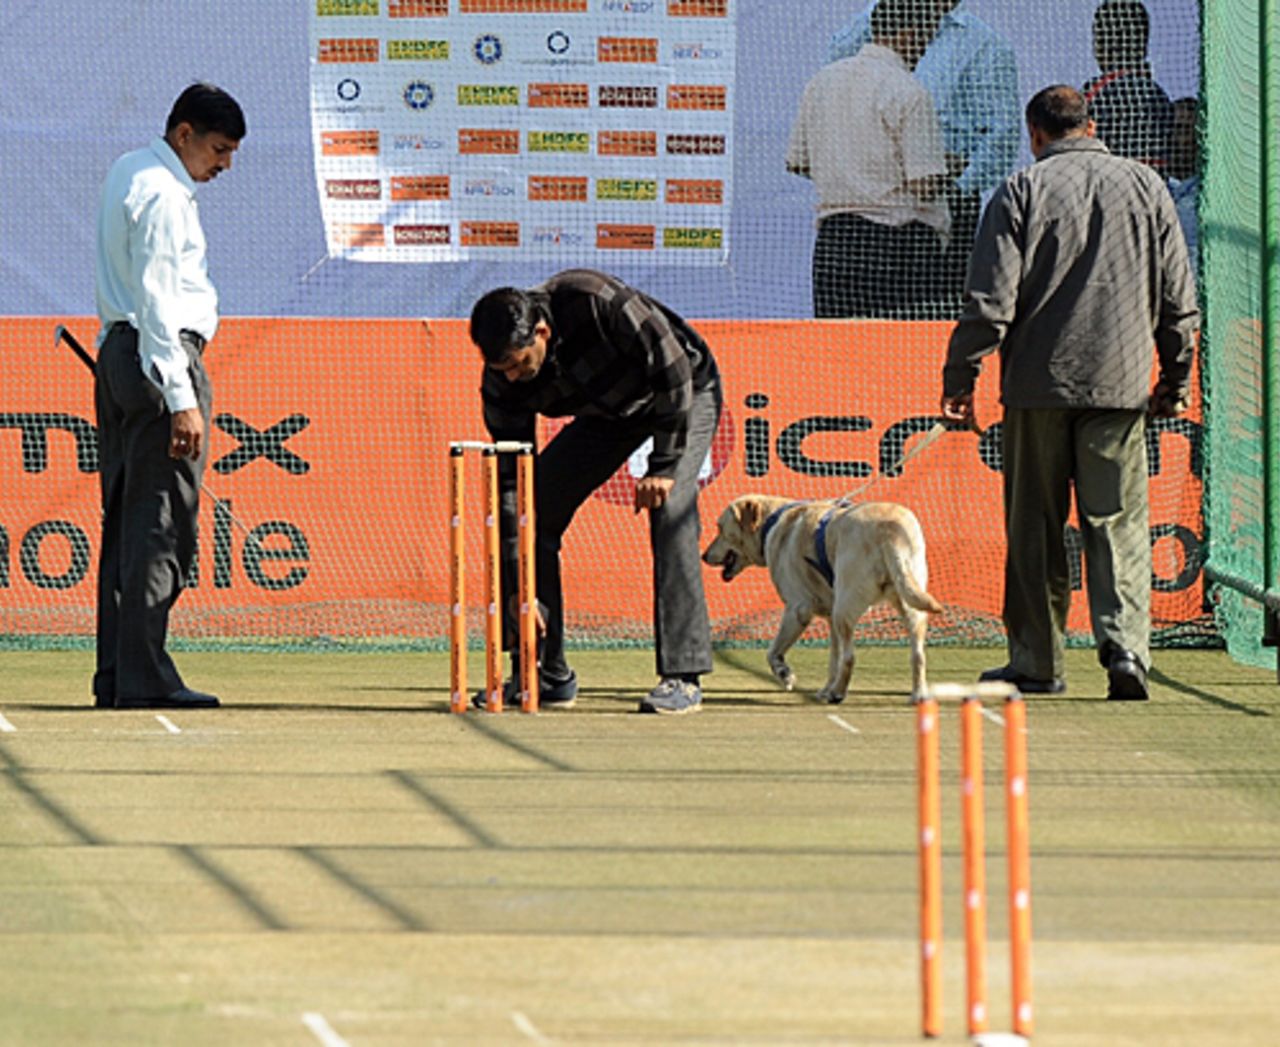 Indian security personnel and a sniffer dog check the nets prior to a training session, Jaipur, February 20, 2010